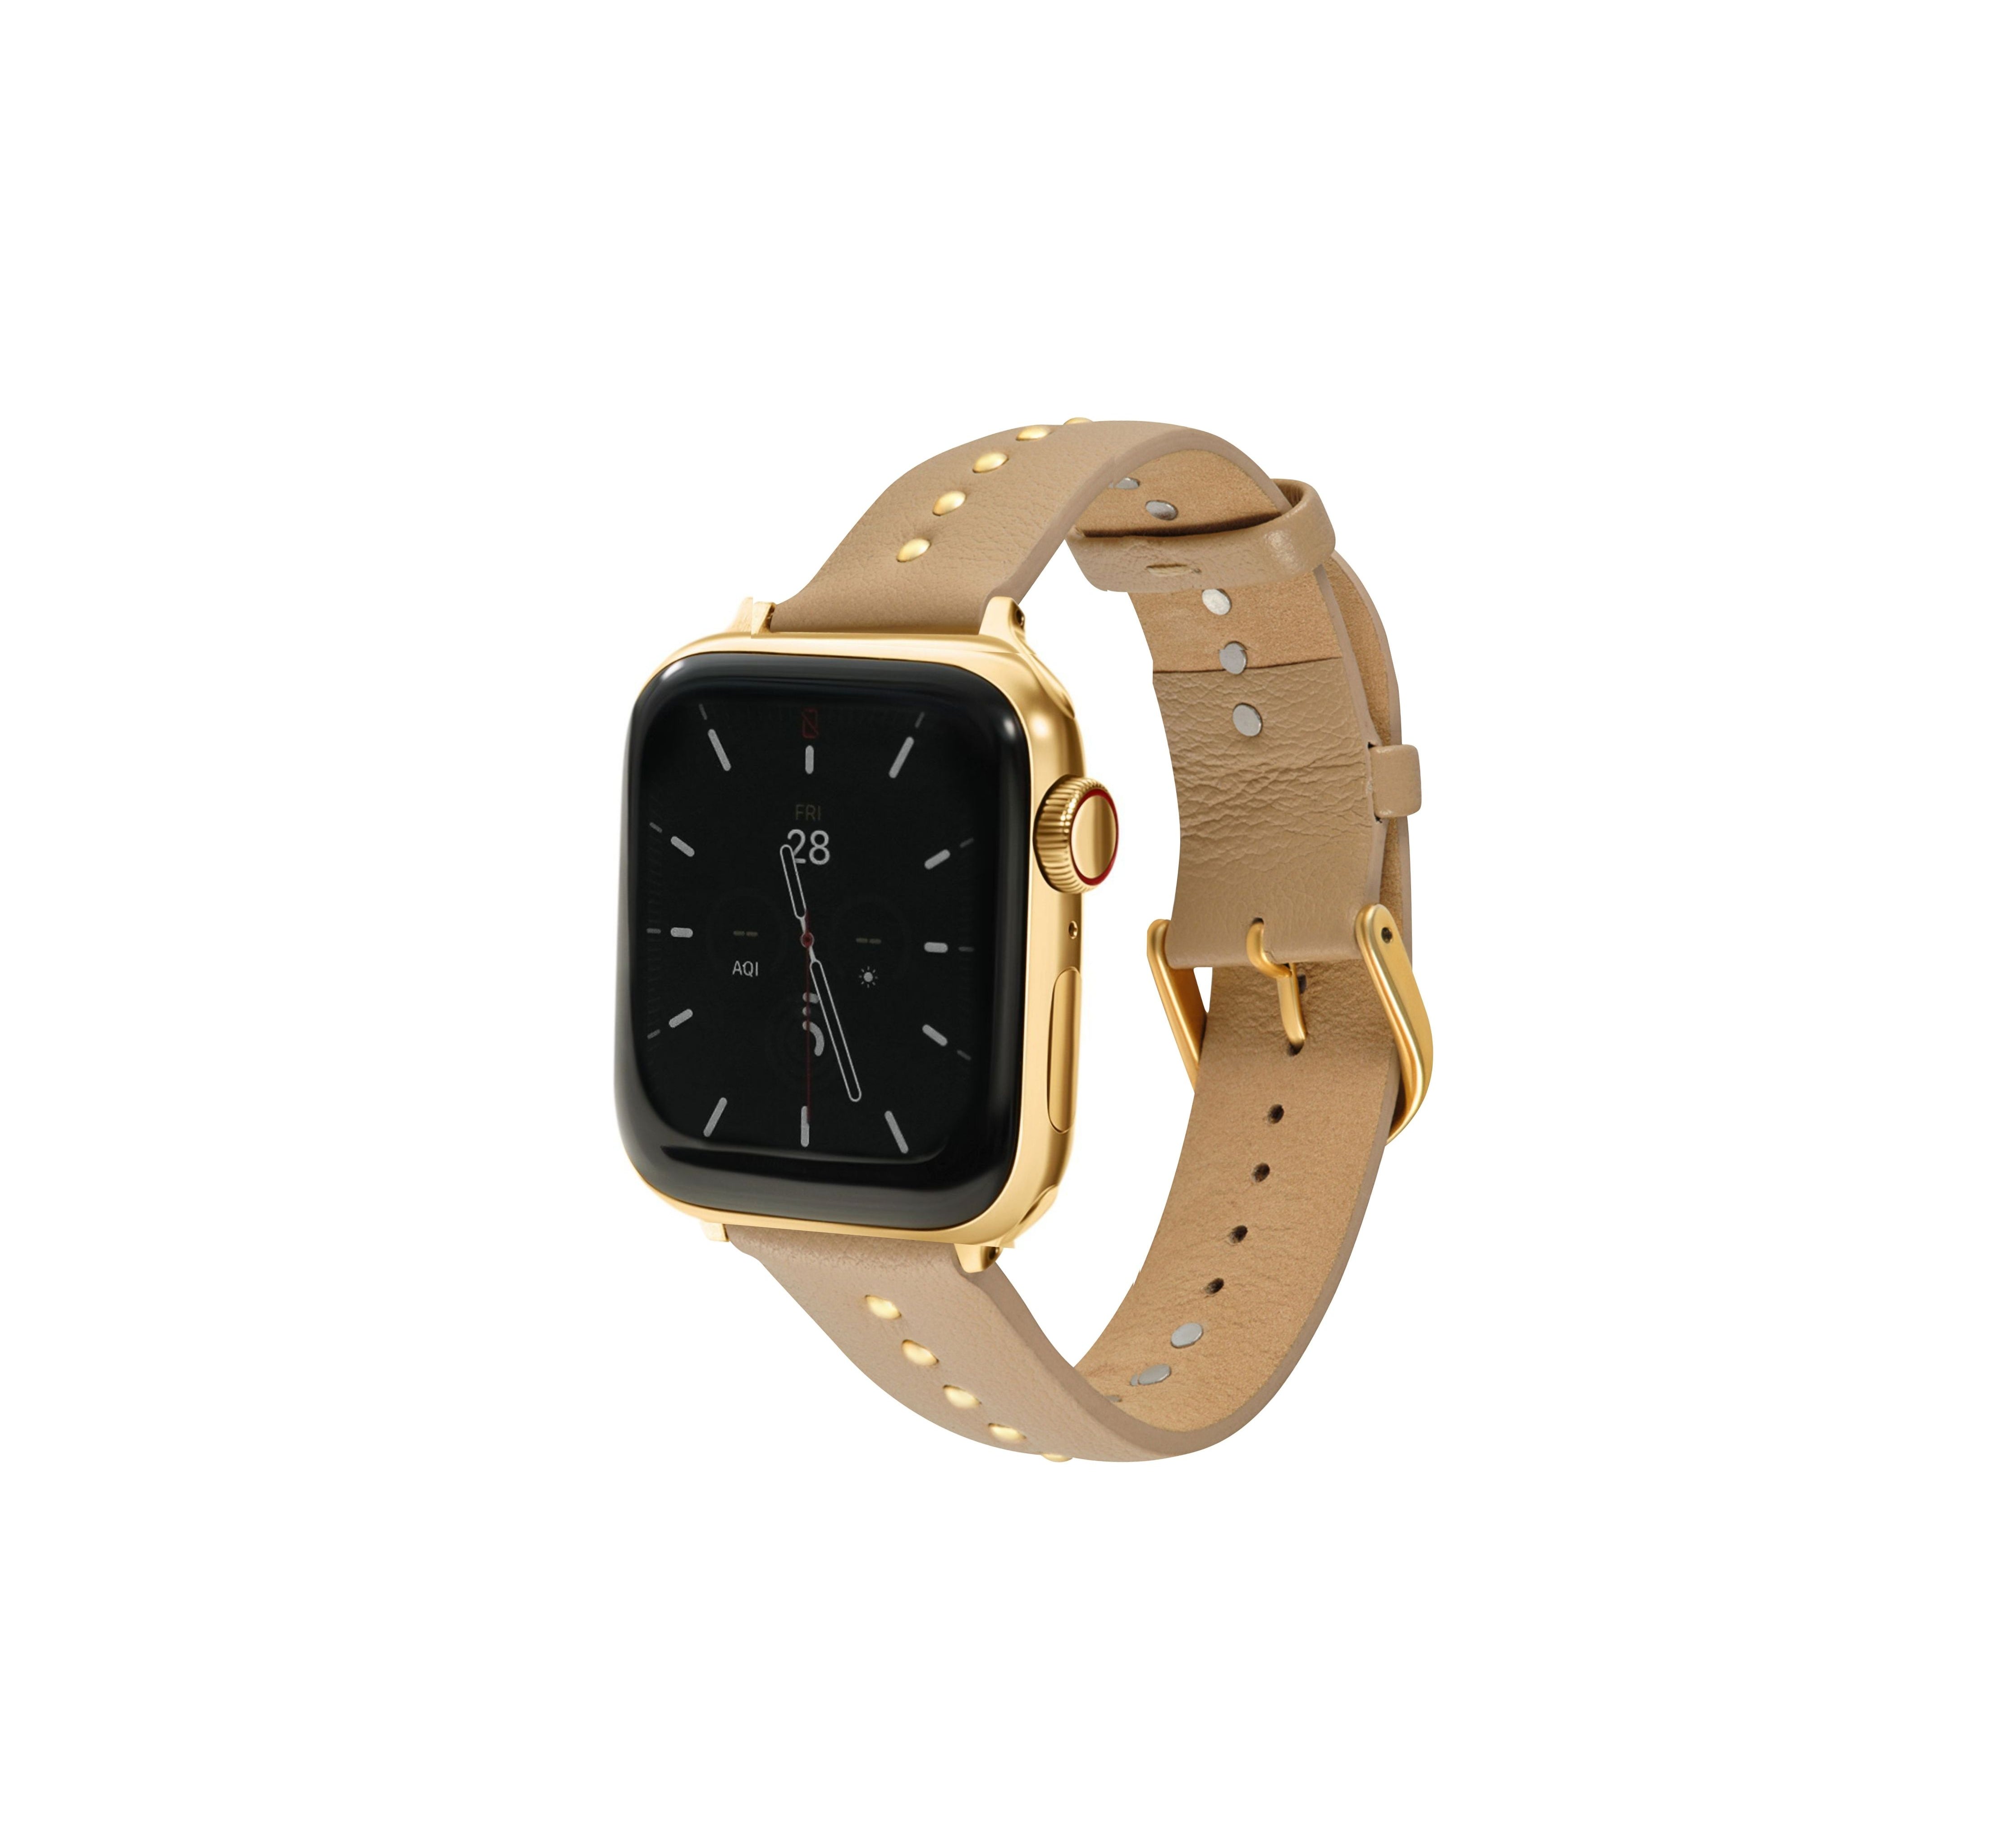 Taupe Stud Band for the Apple Watch - Goldenerre Women's Apple Watch Bands and Jewelry